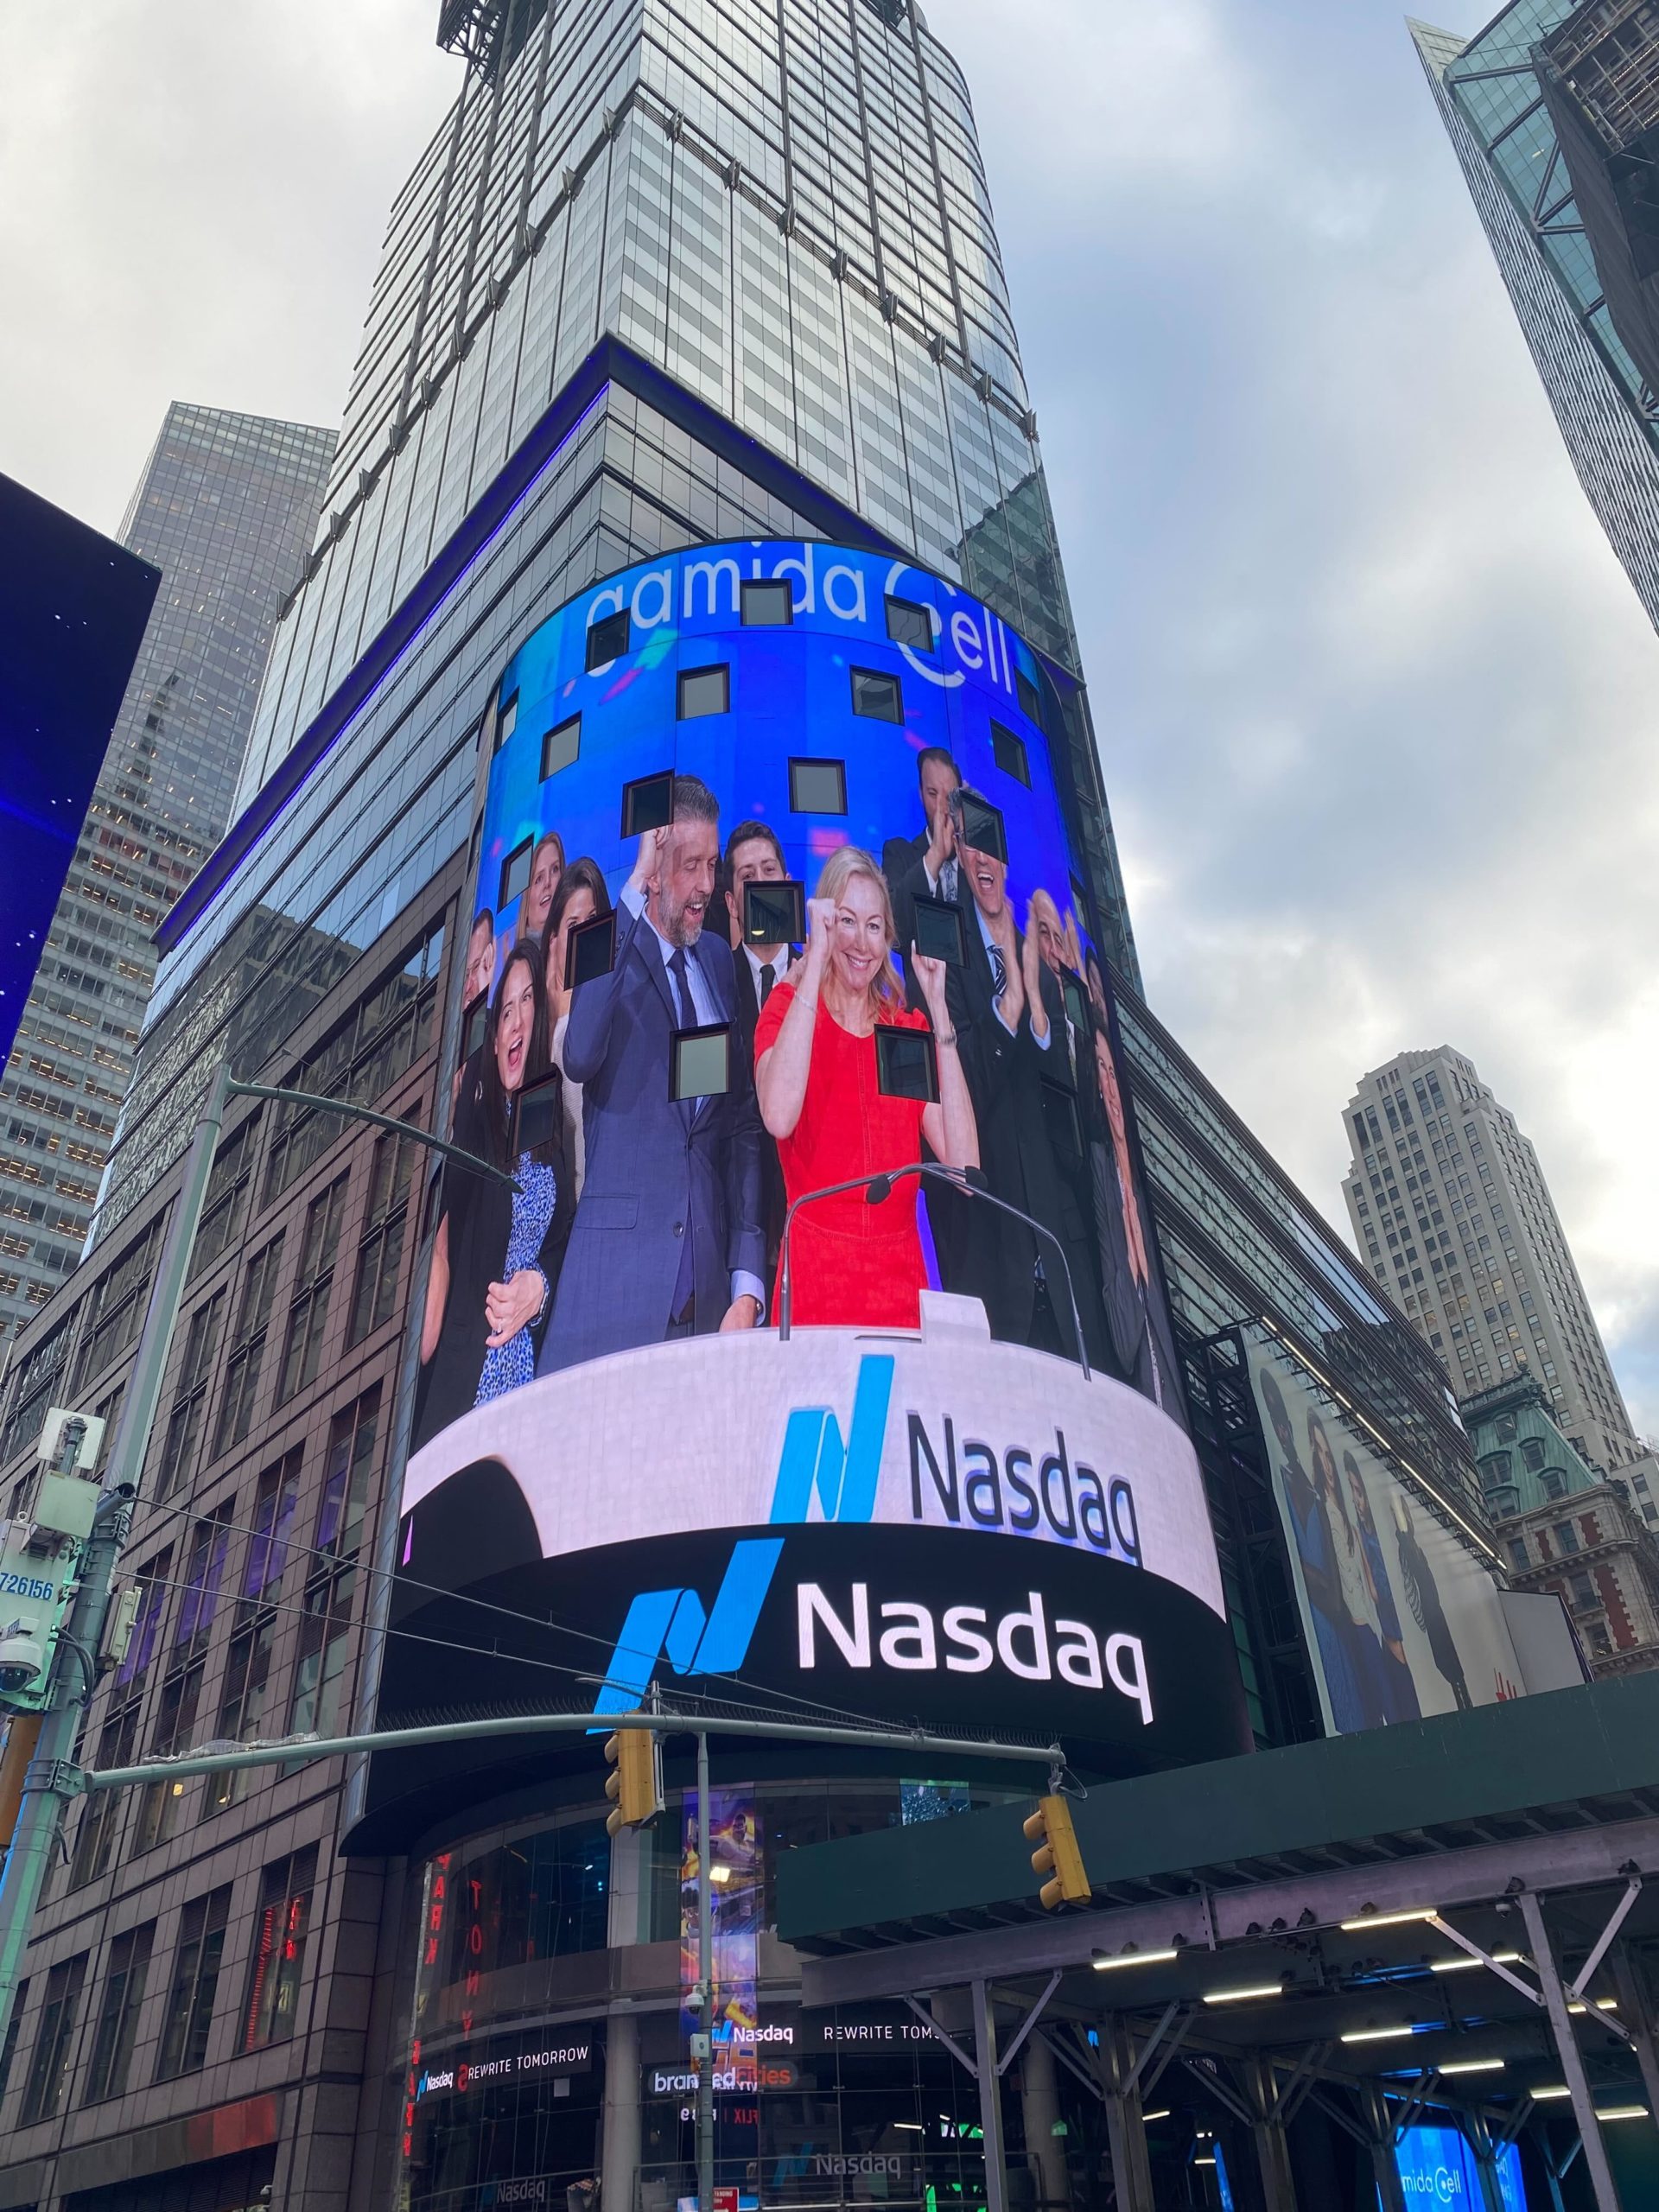 Gamida Cell Ltd. visits the Nasdaq MarketSite in Times Square NYC to ring the closing bell (February 6, 2023)